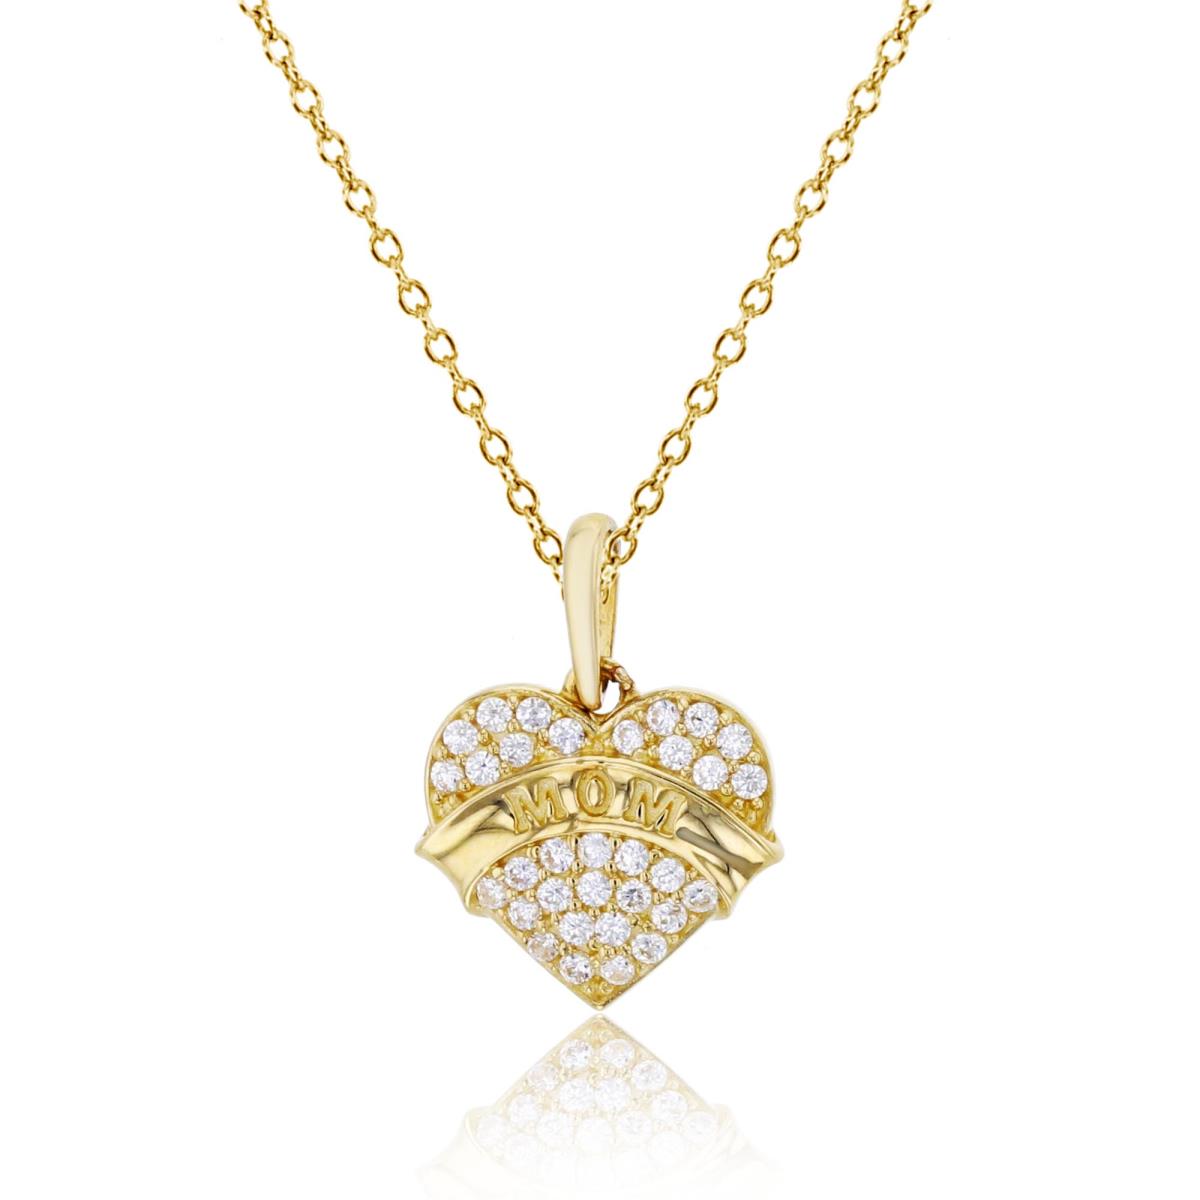 10K Yellow Gold Micropave CZ Heart with Engraved "MOM" 18" Necklace